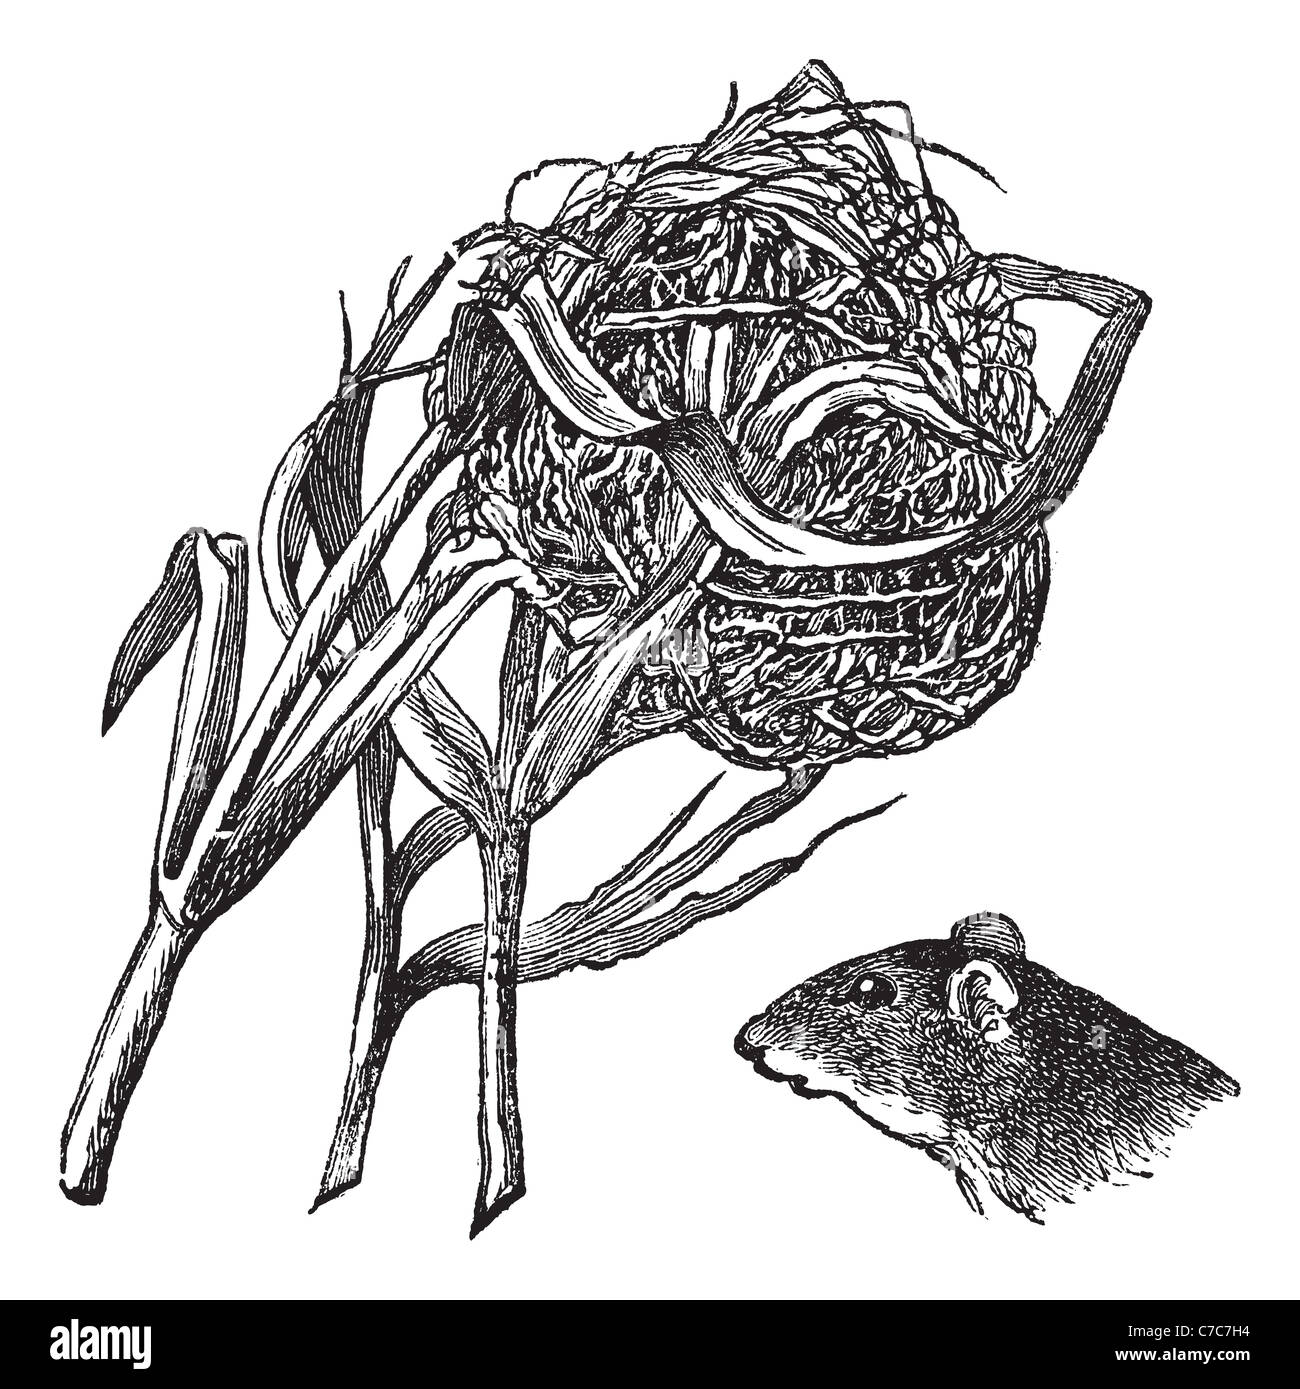 Nest and the head of harvest mouse, vintage engraving. Old engraved illustration of nest and the head of harvest mouse. Stock Photo